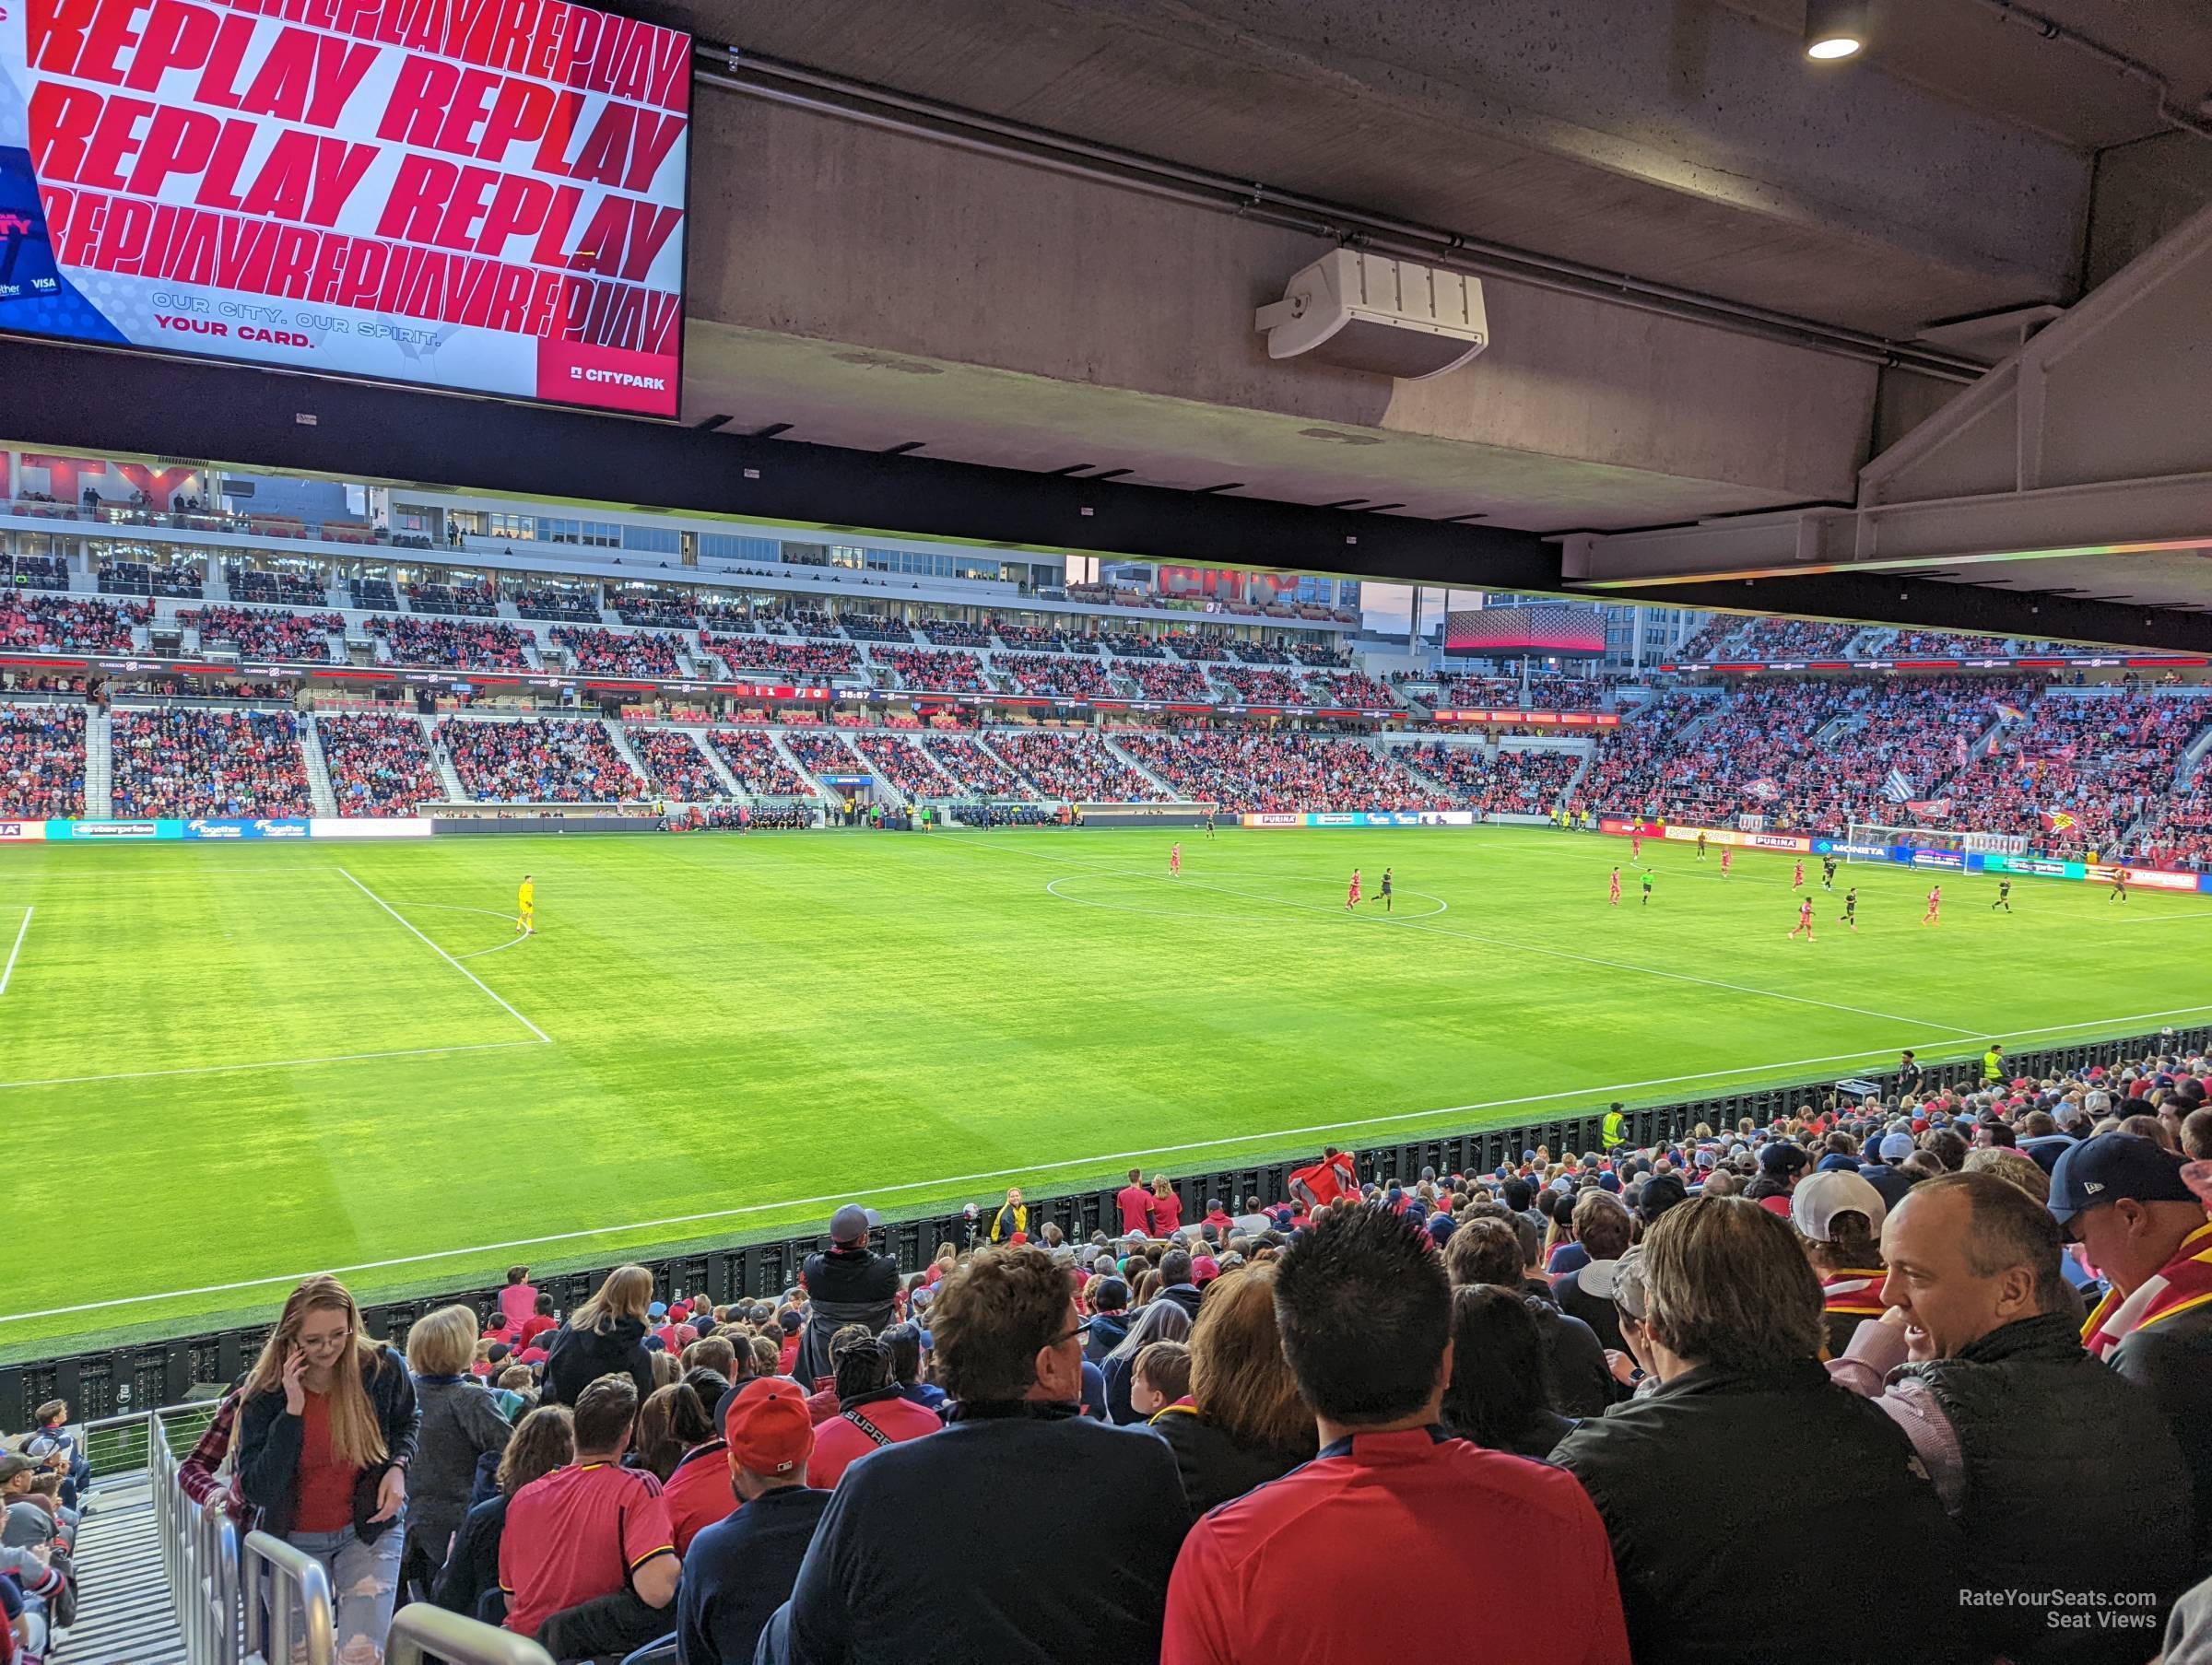 section 102, row 20 seat view  - citypark